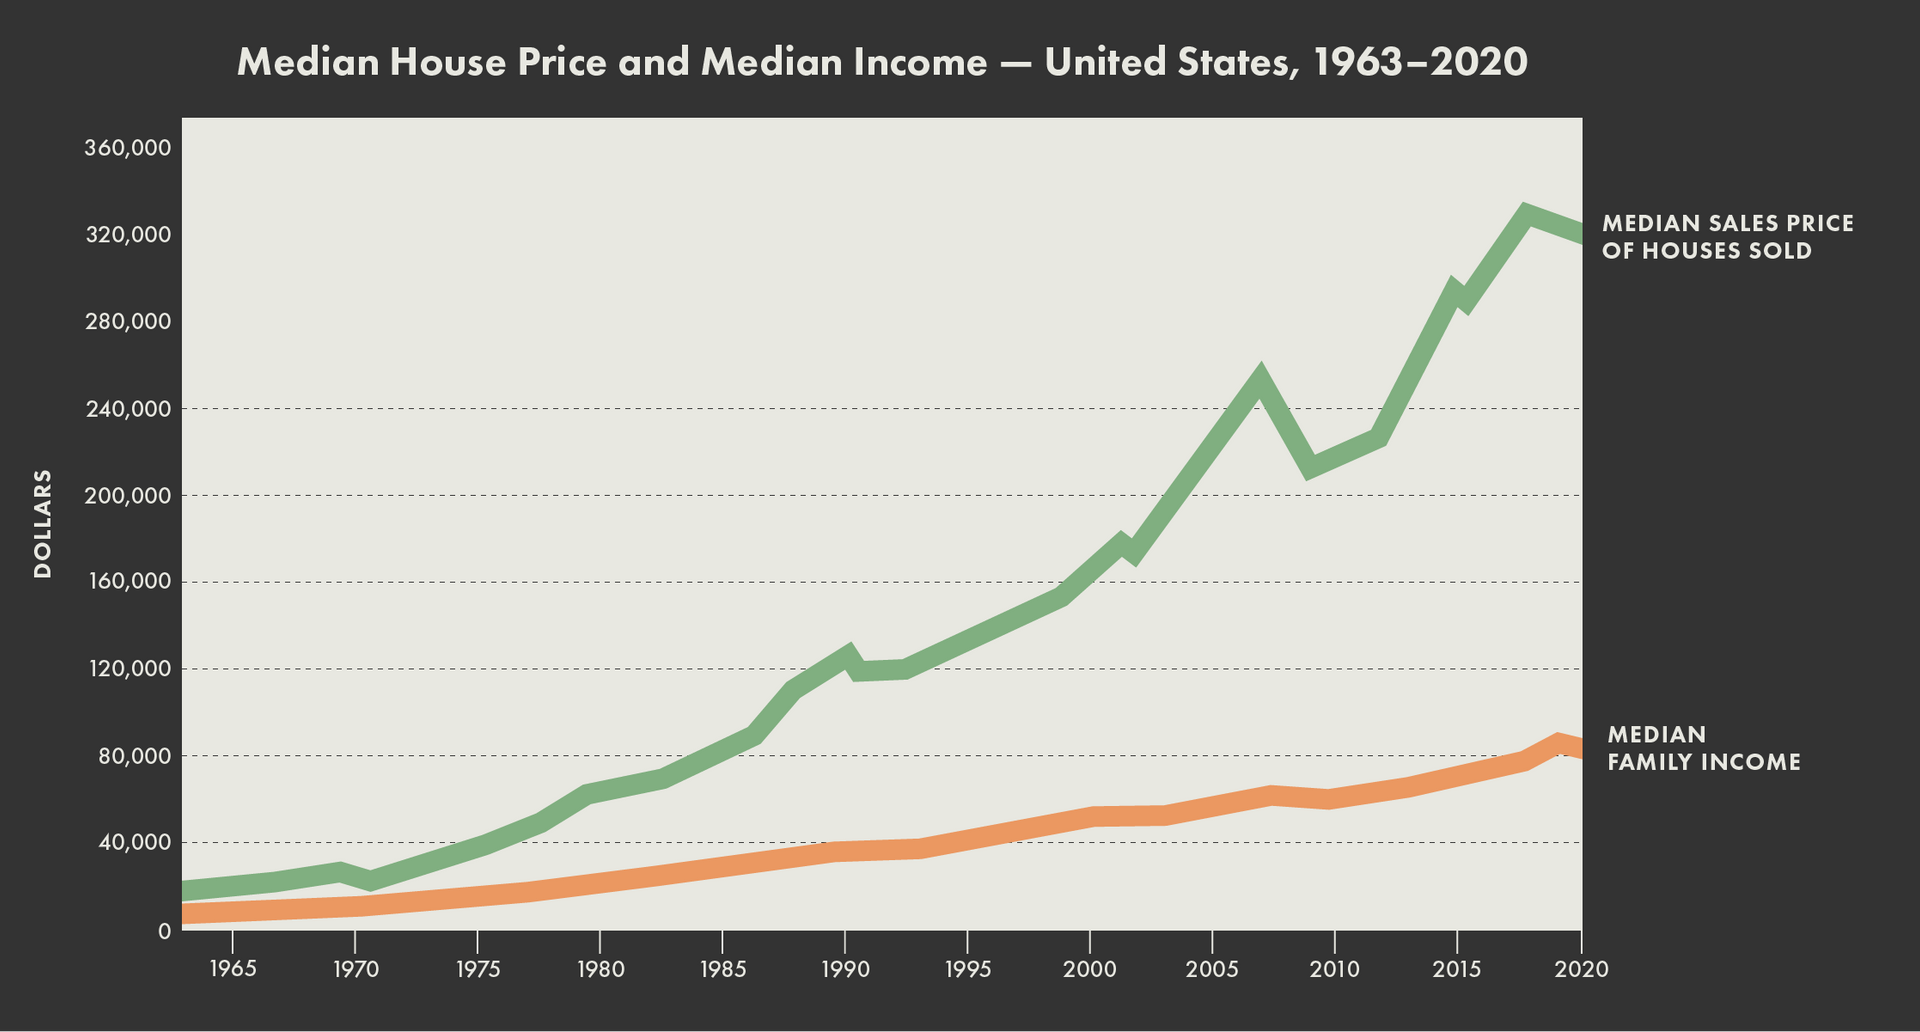 Increases in house prices have outpaced the growth of family income since the 1960s.